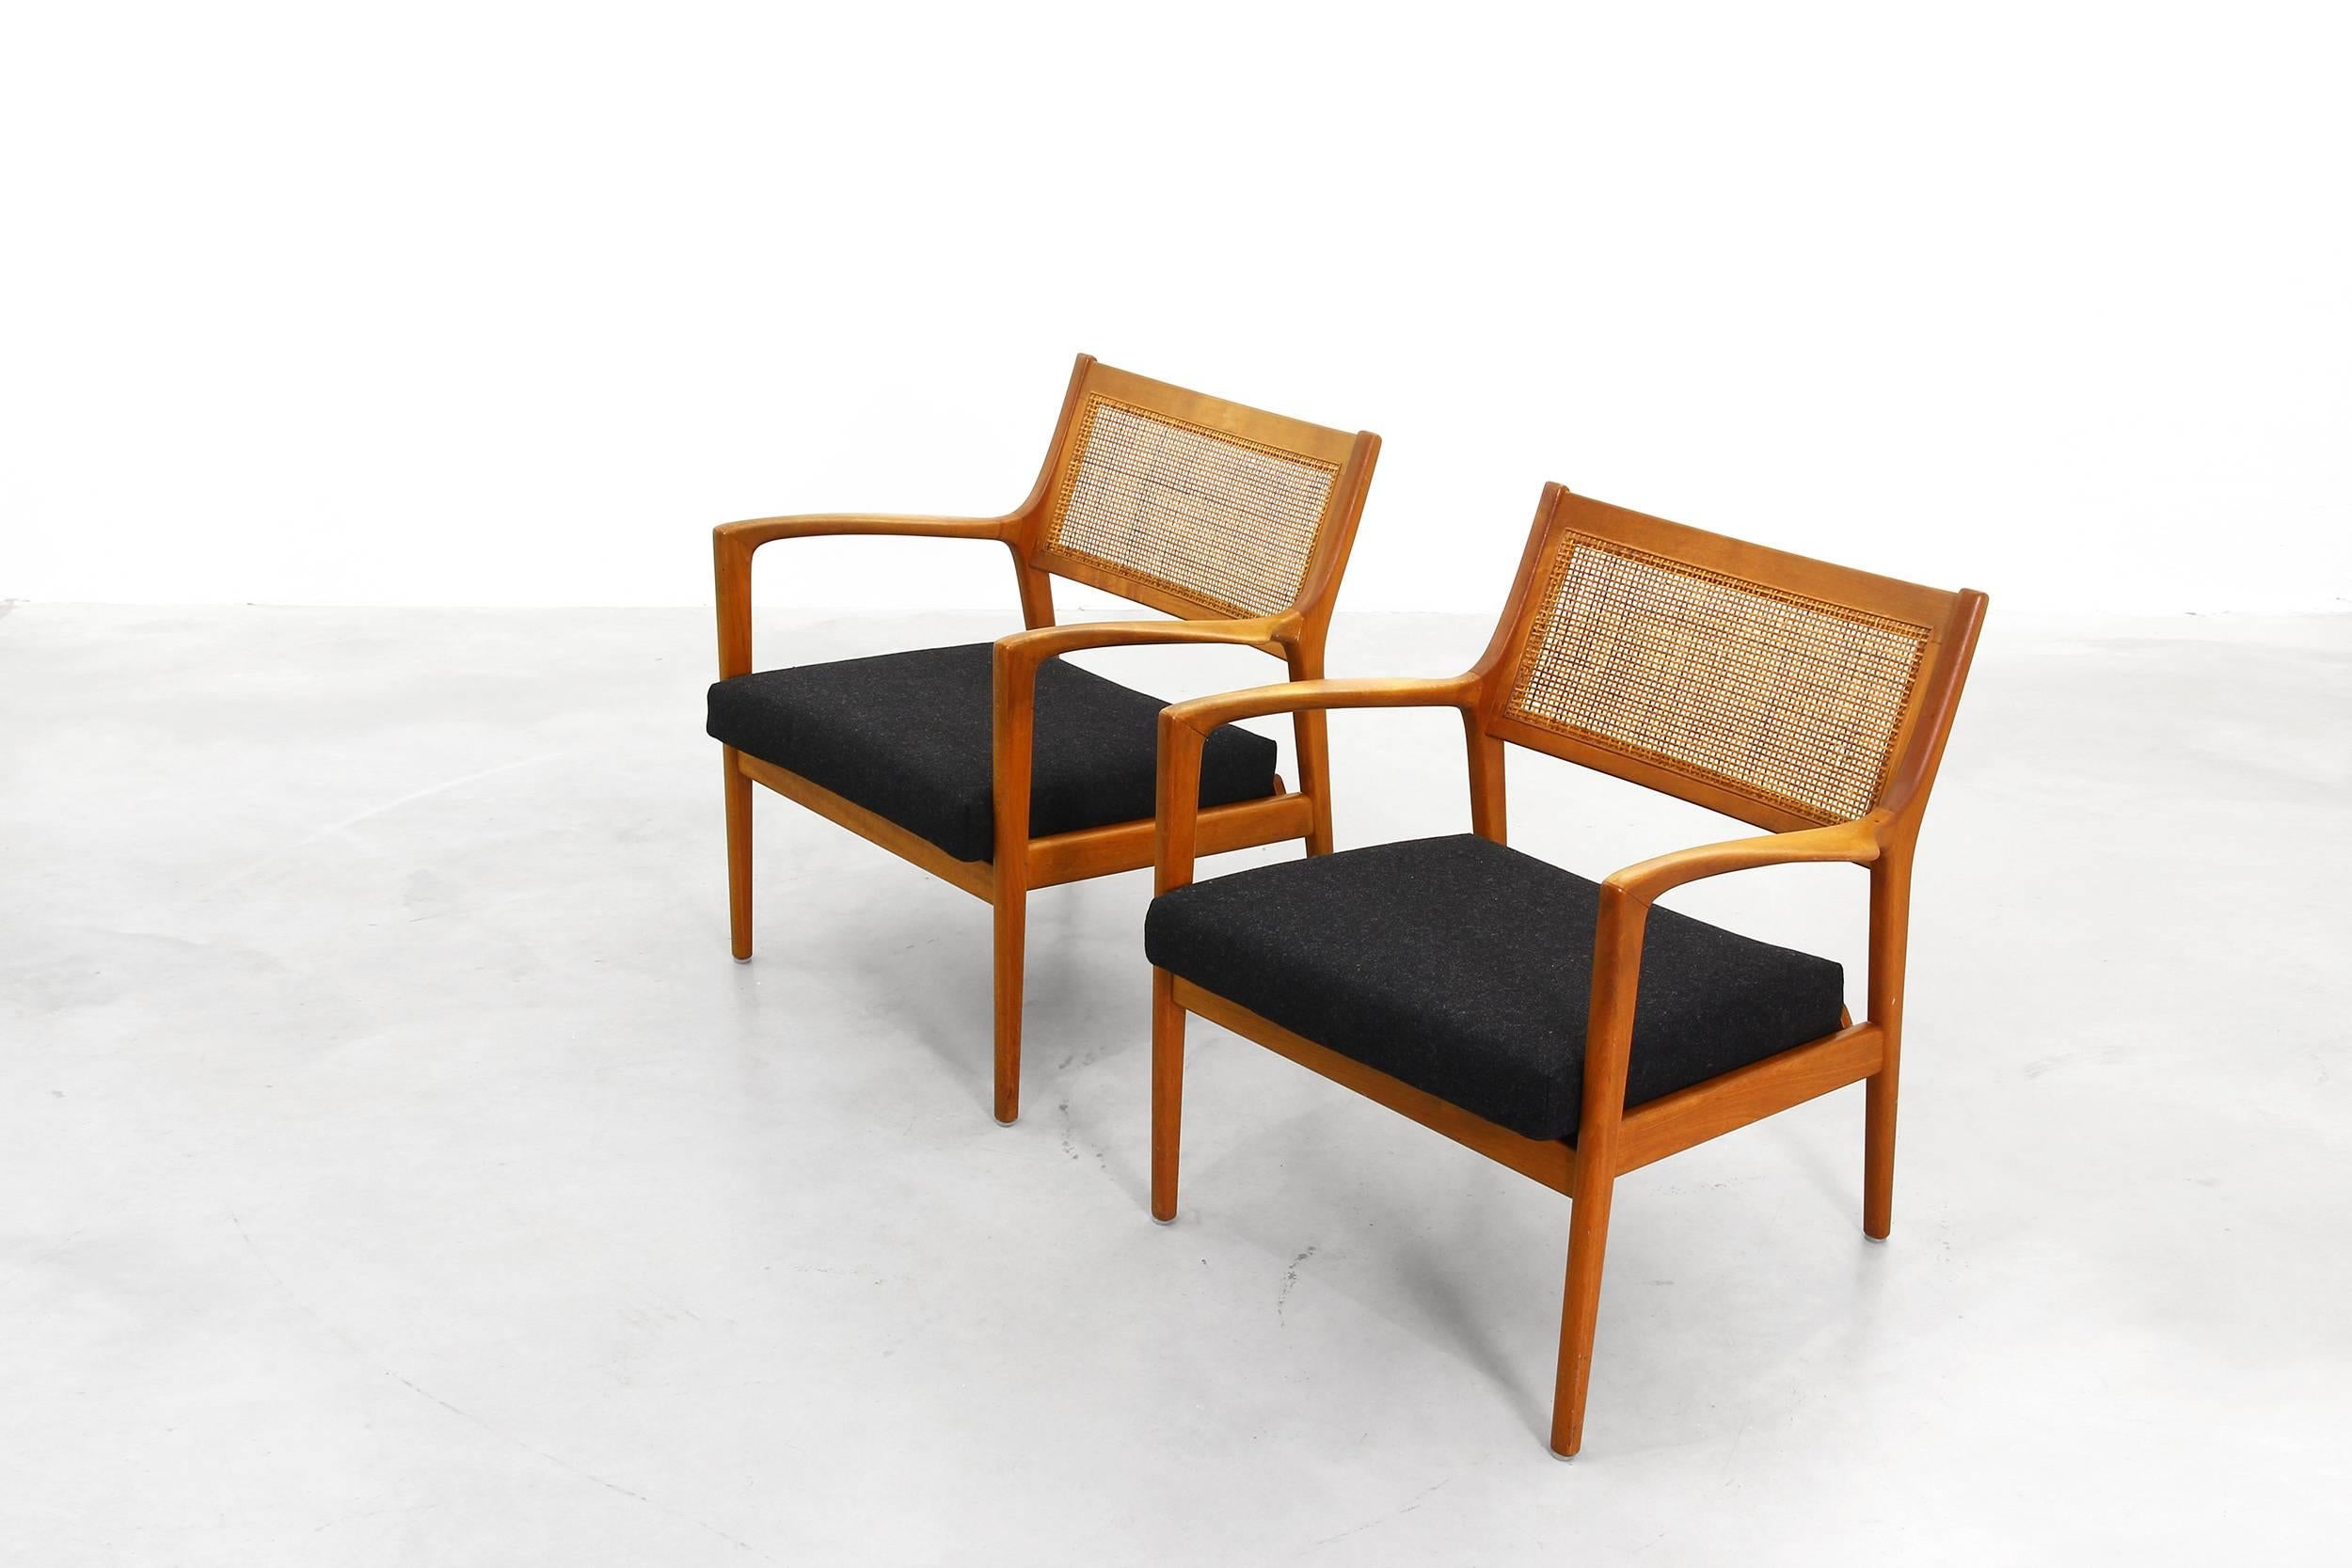 20th Century Pair of Lounge Chairs by Karl Erik Ekselius for JOC Mobler Sweden